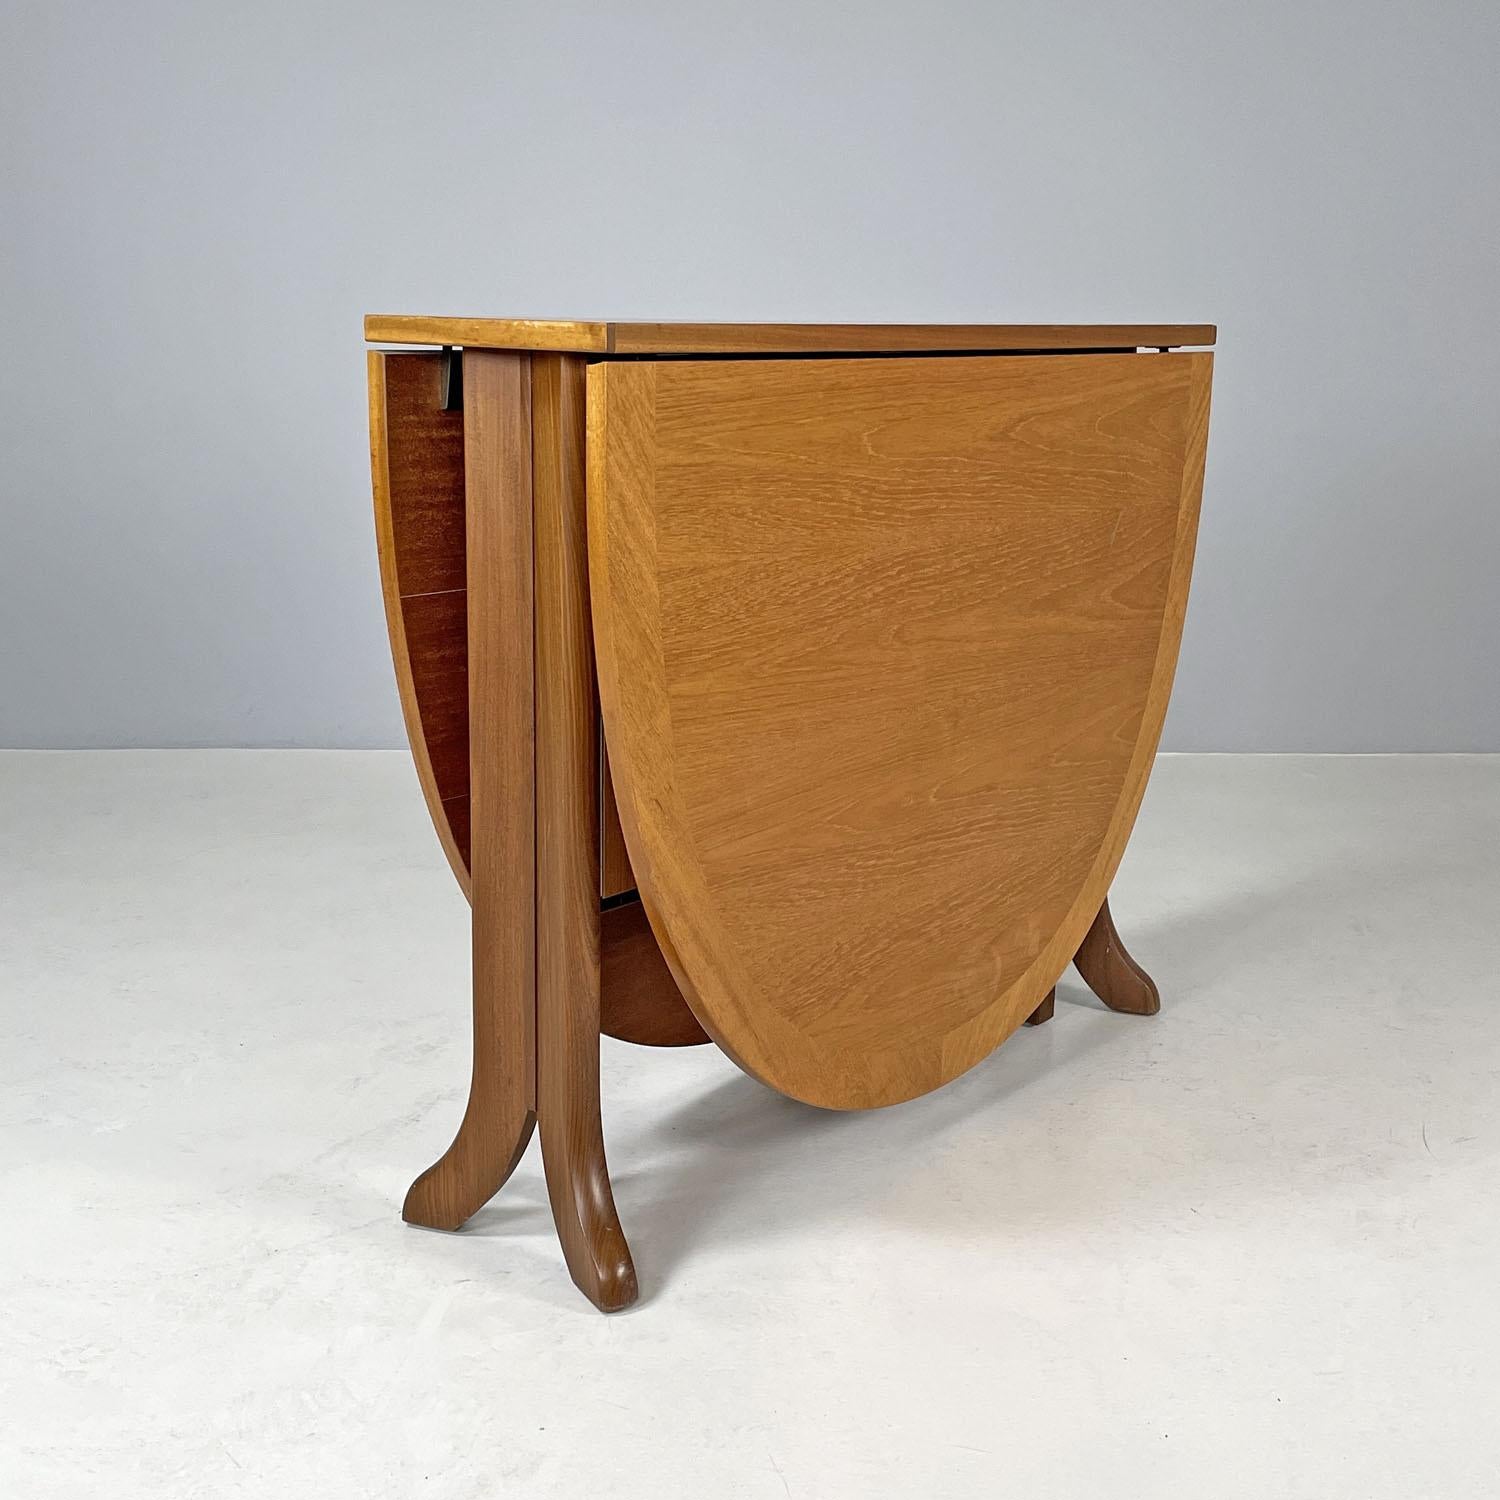 English mid-century modern wooden dining table with flap doors, 1960s For Sale 1